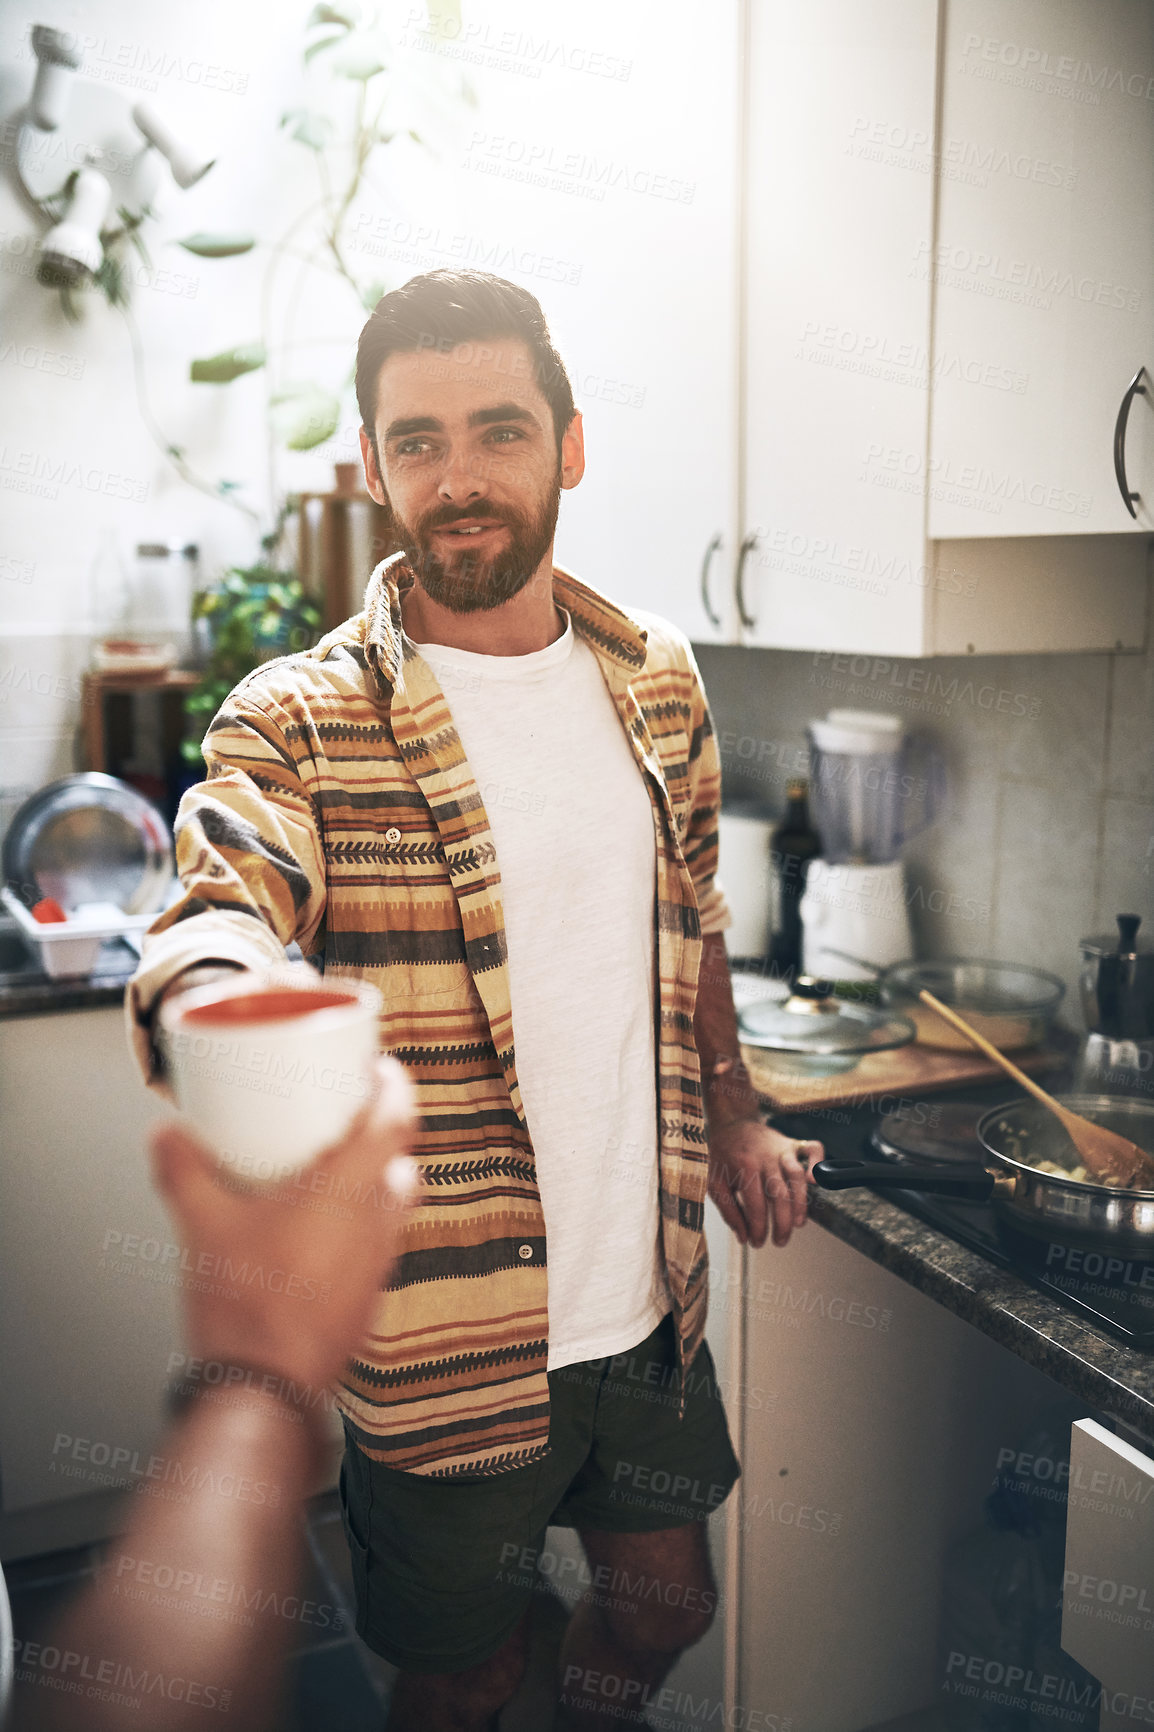 Buy stock photo POV shot of an unrecognizable man receiving a cup of coffee inside of the kitchen during the day